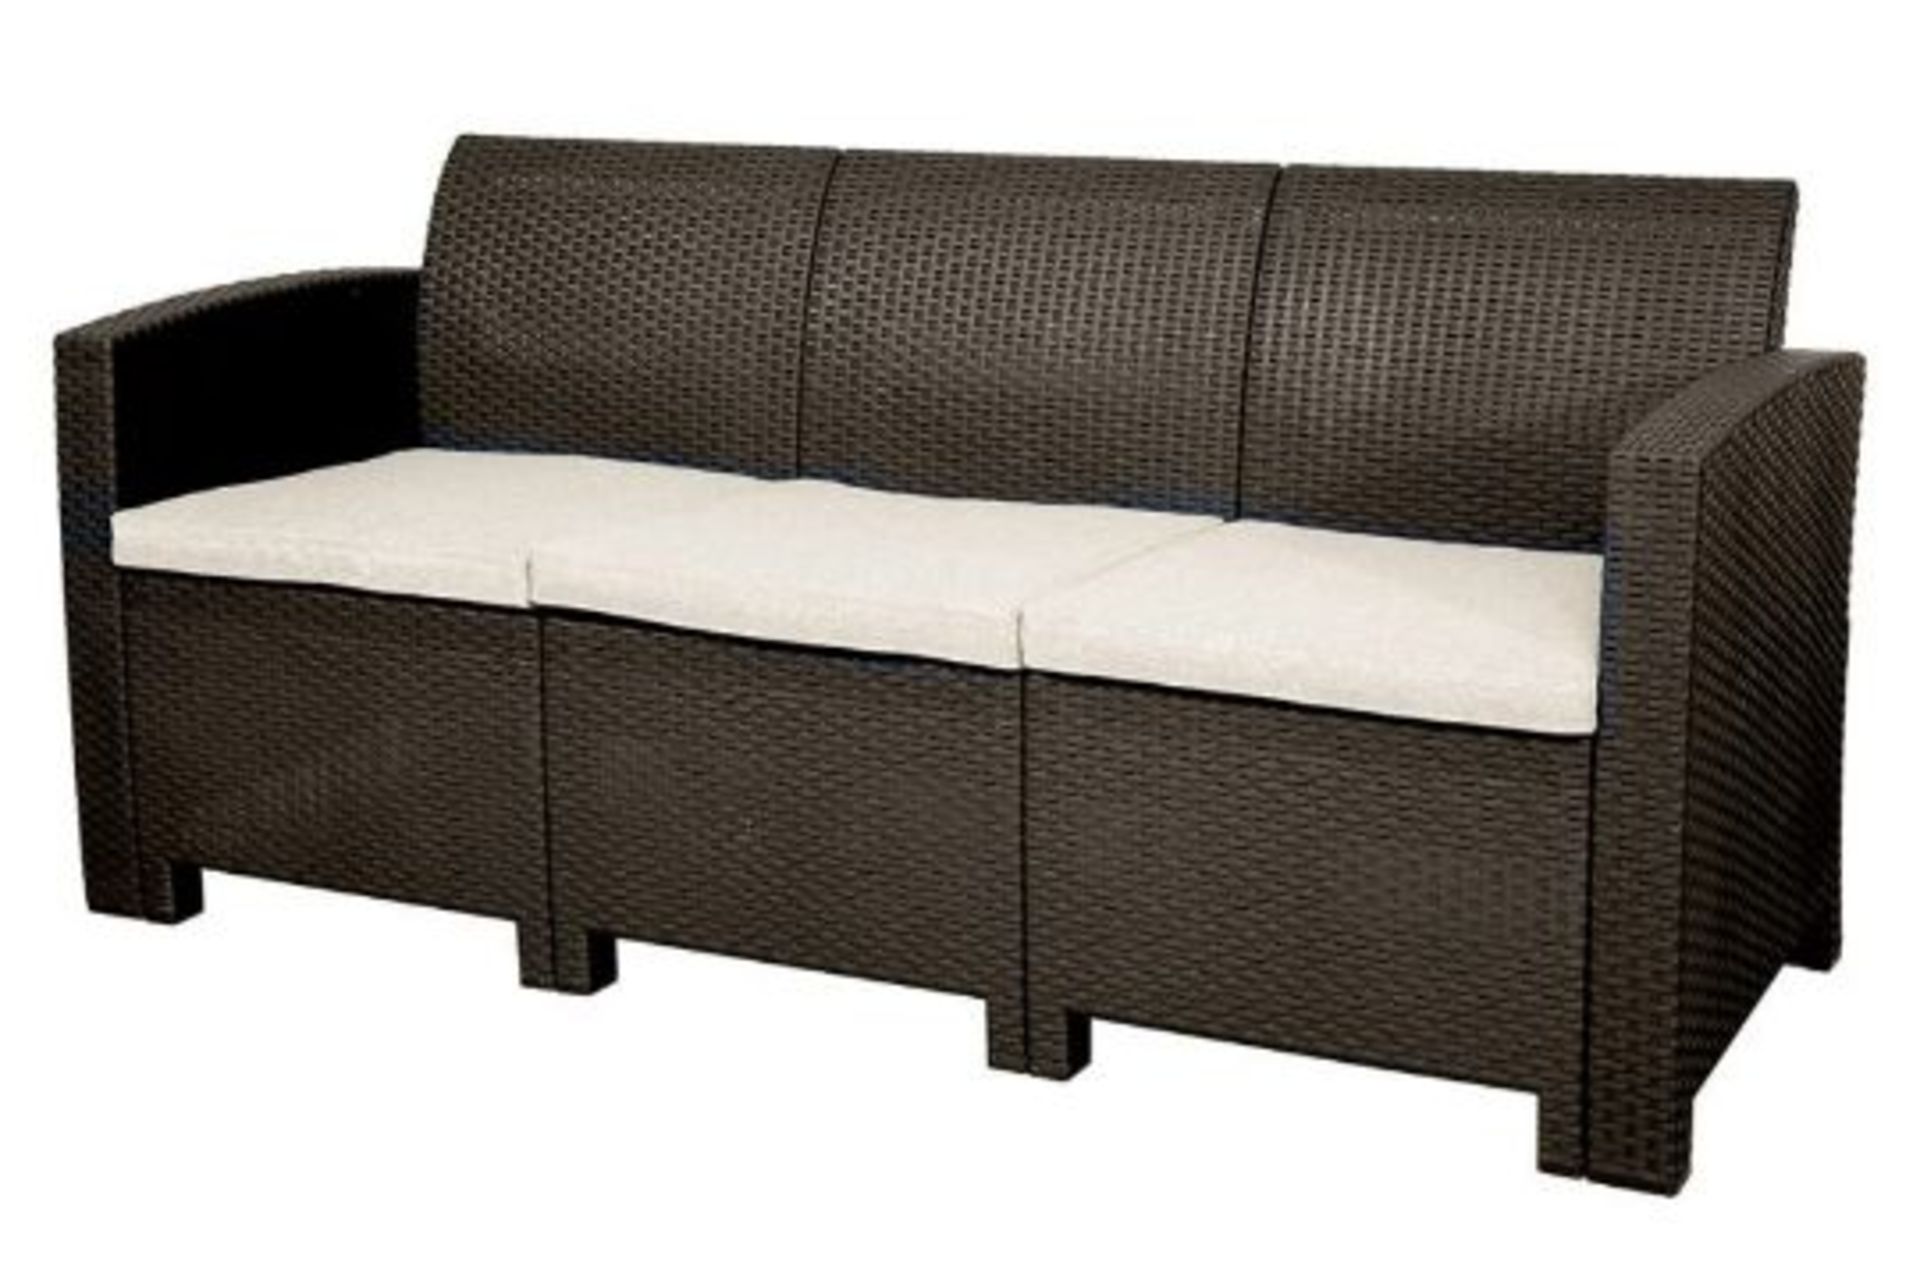 New Boxed Marbella 3-Seater Rattan-Effect Sofa in Brown. RRP £399.99. With a unique modern finish, - Image 4 of 4